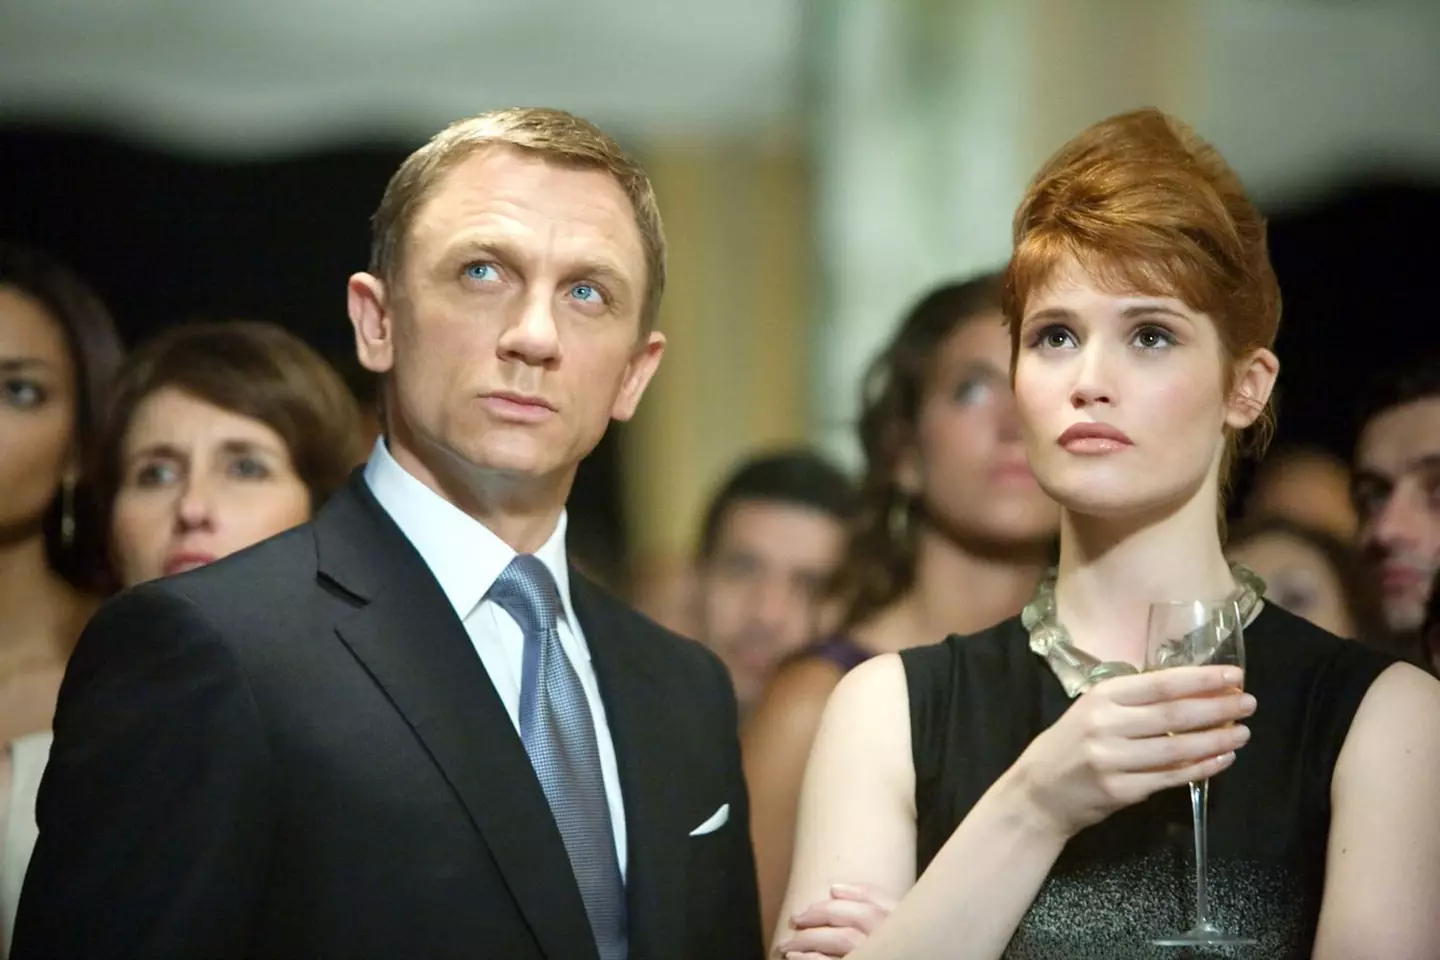 The Quantum of Solace clip has gone viral for all the wrong reasons.